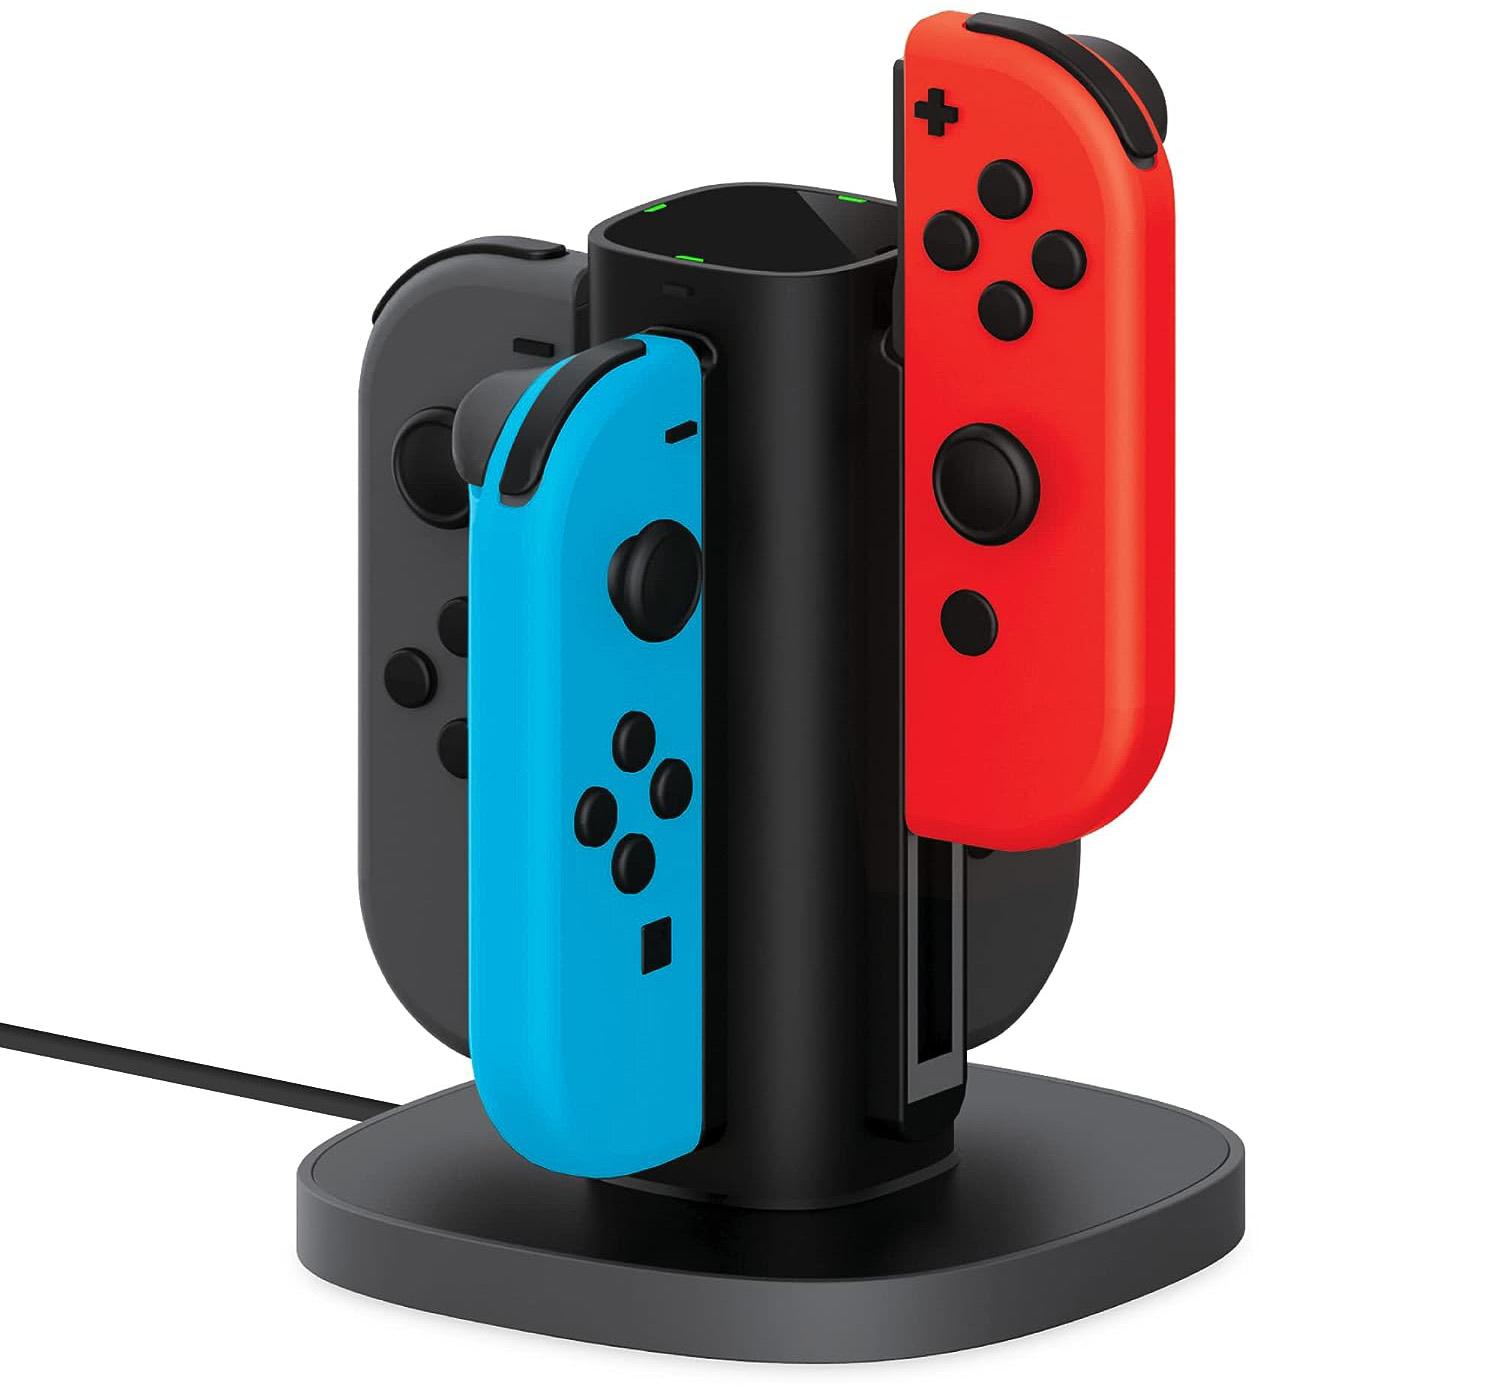 Joy-Con Charger Dock For Nintendo Switch Gaming Controllers for $9.99